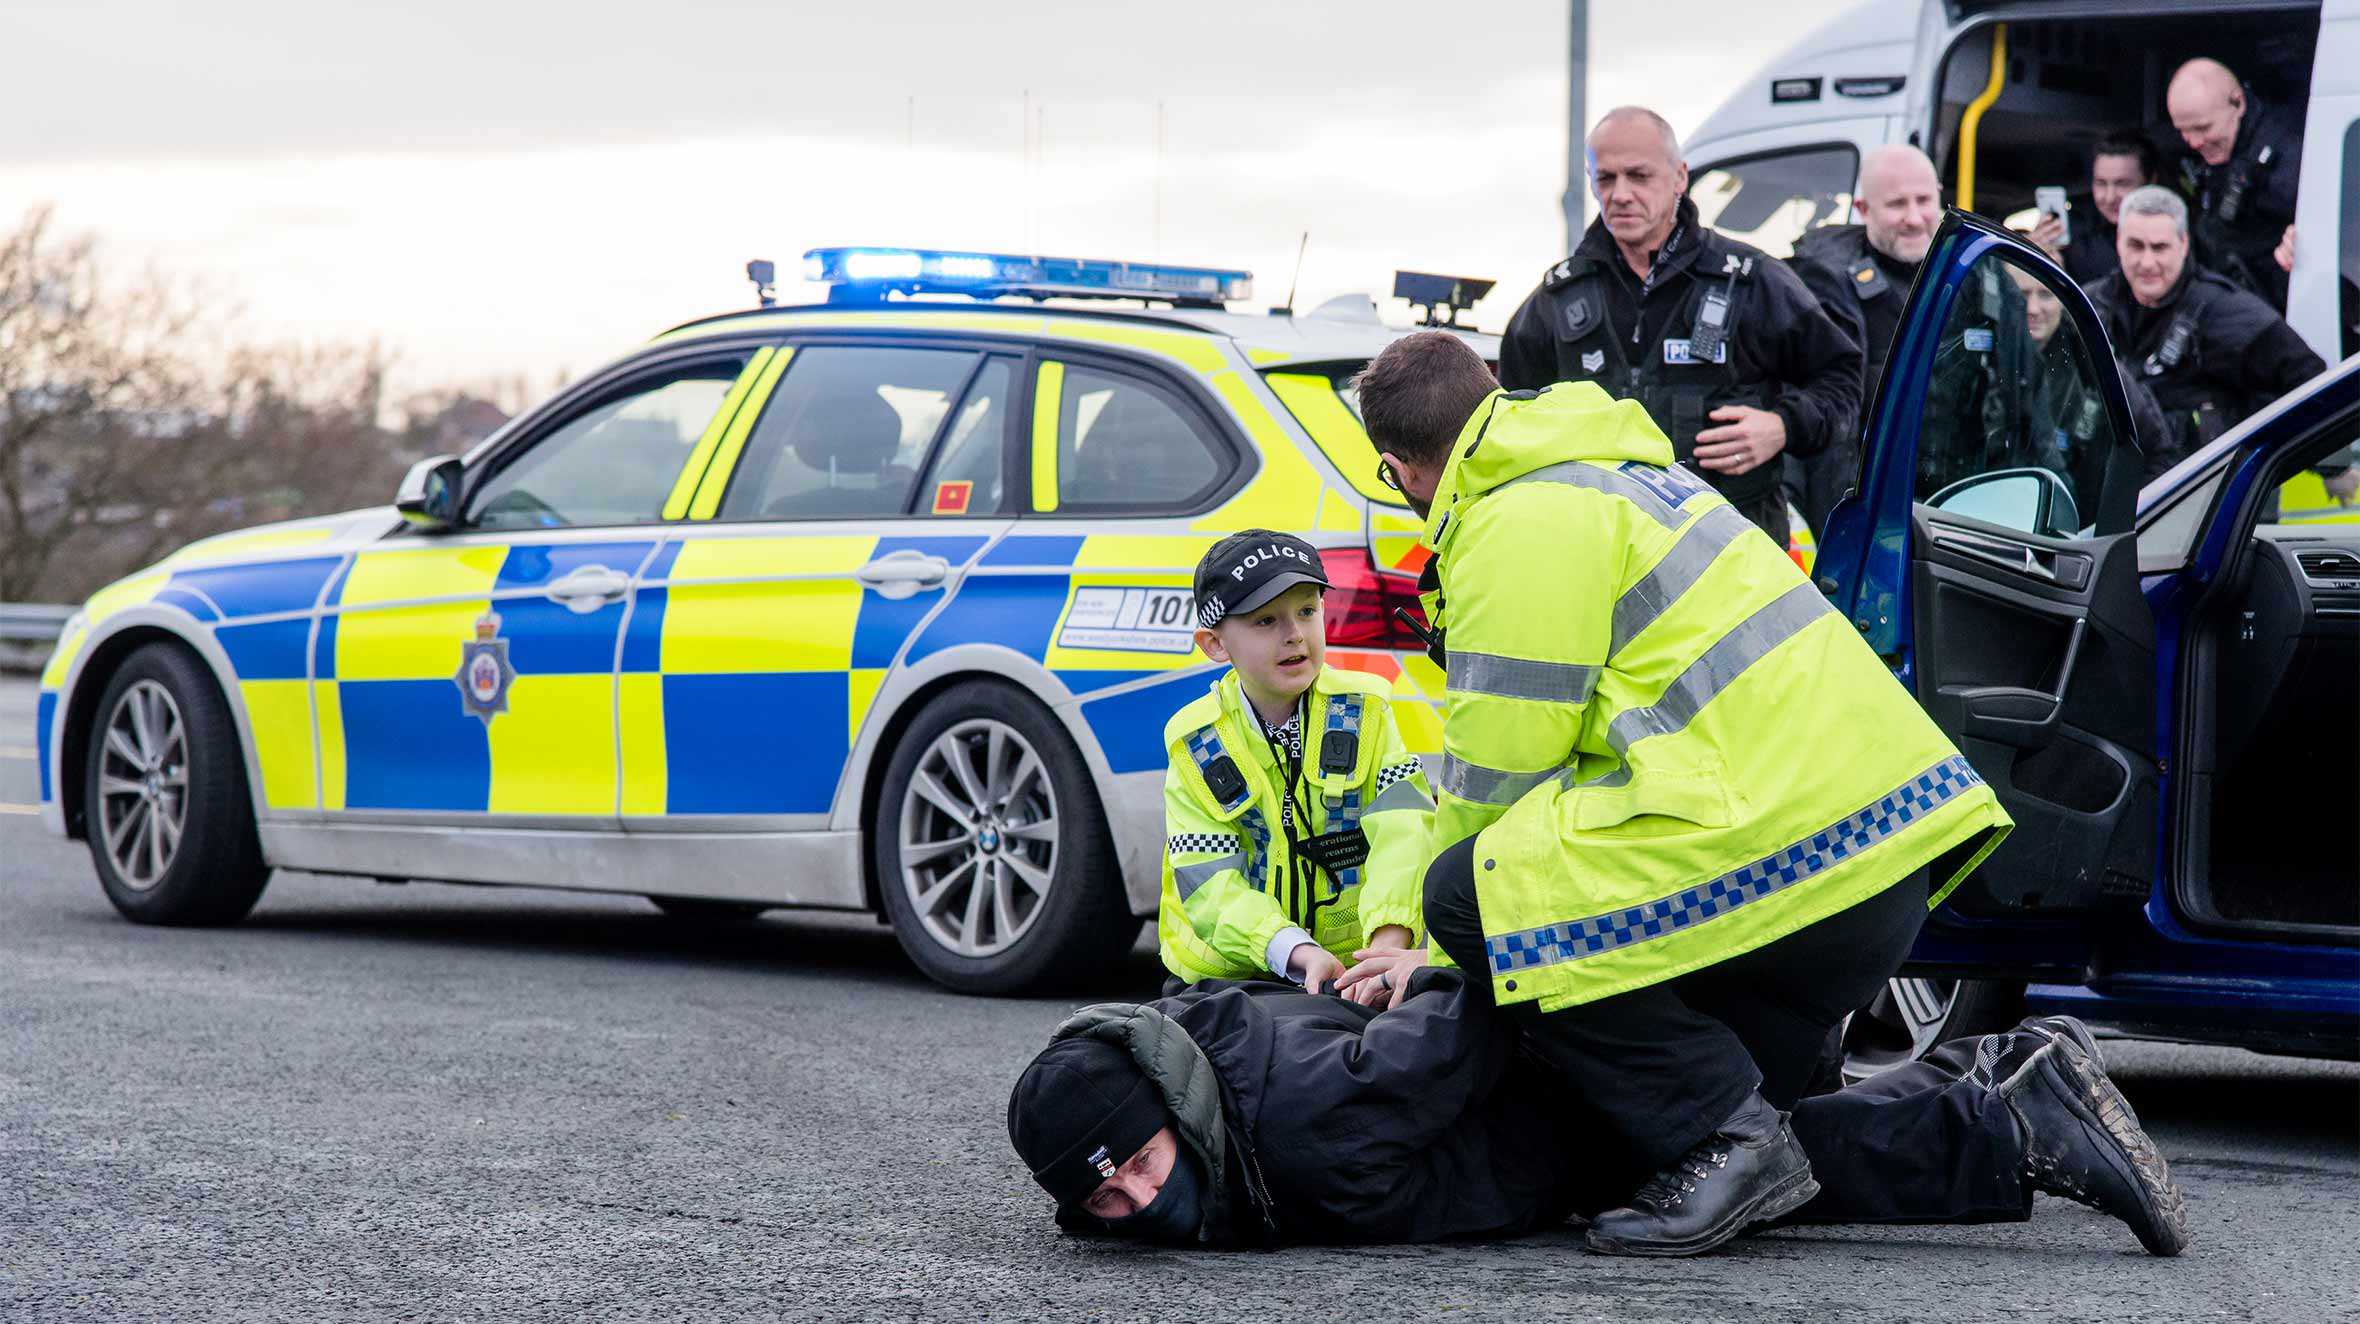 Allan and another officer subduing a suspect on the floor, with a police car and riot van in the background.